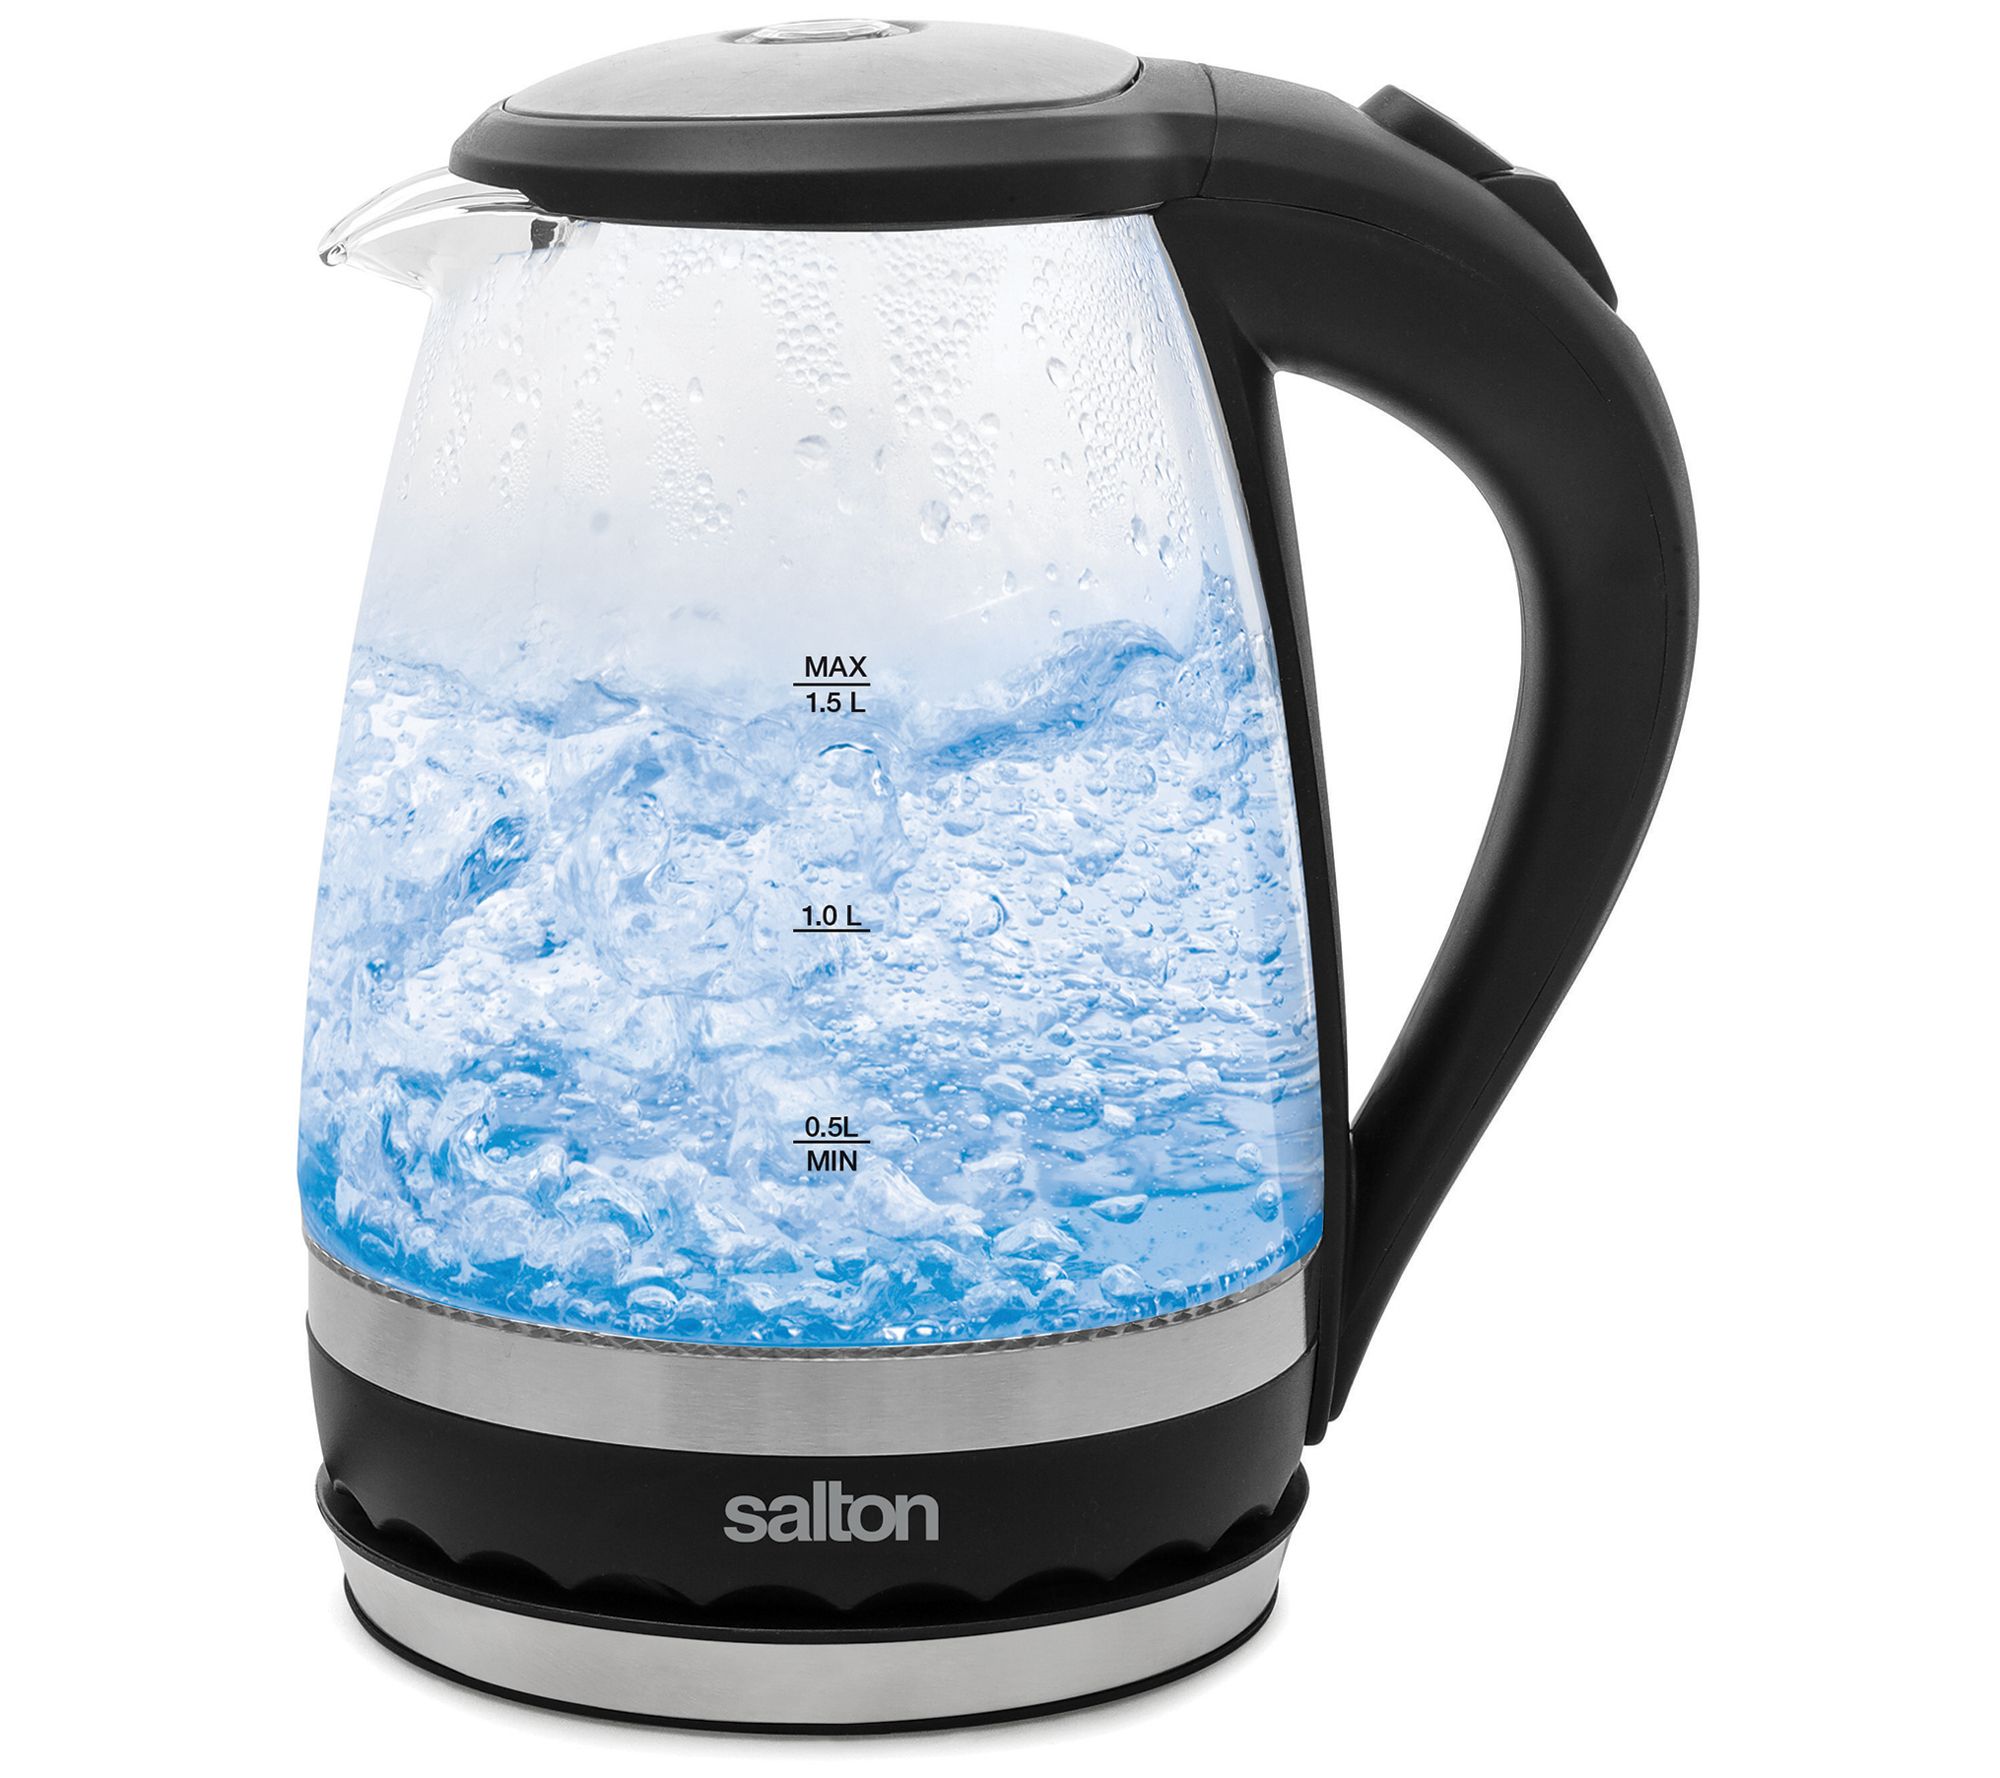 Elite Gourmet 1L Electric Glass Water Kettle